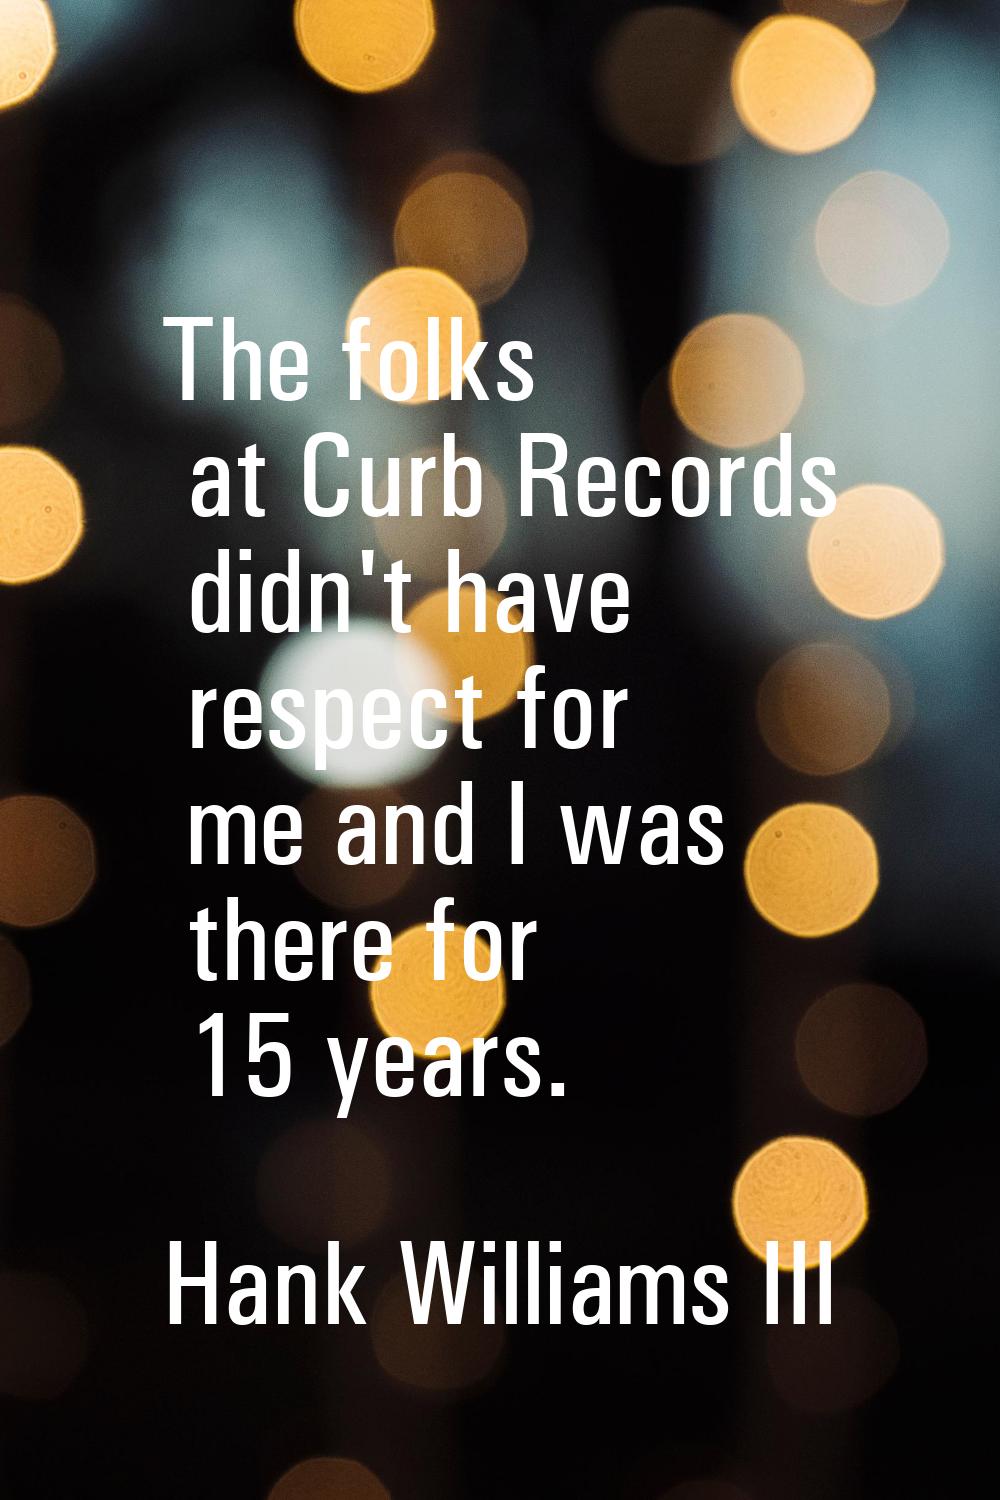 The folks at Curb Records didn't have respect for me and I was there for 15 years.